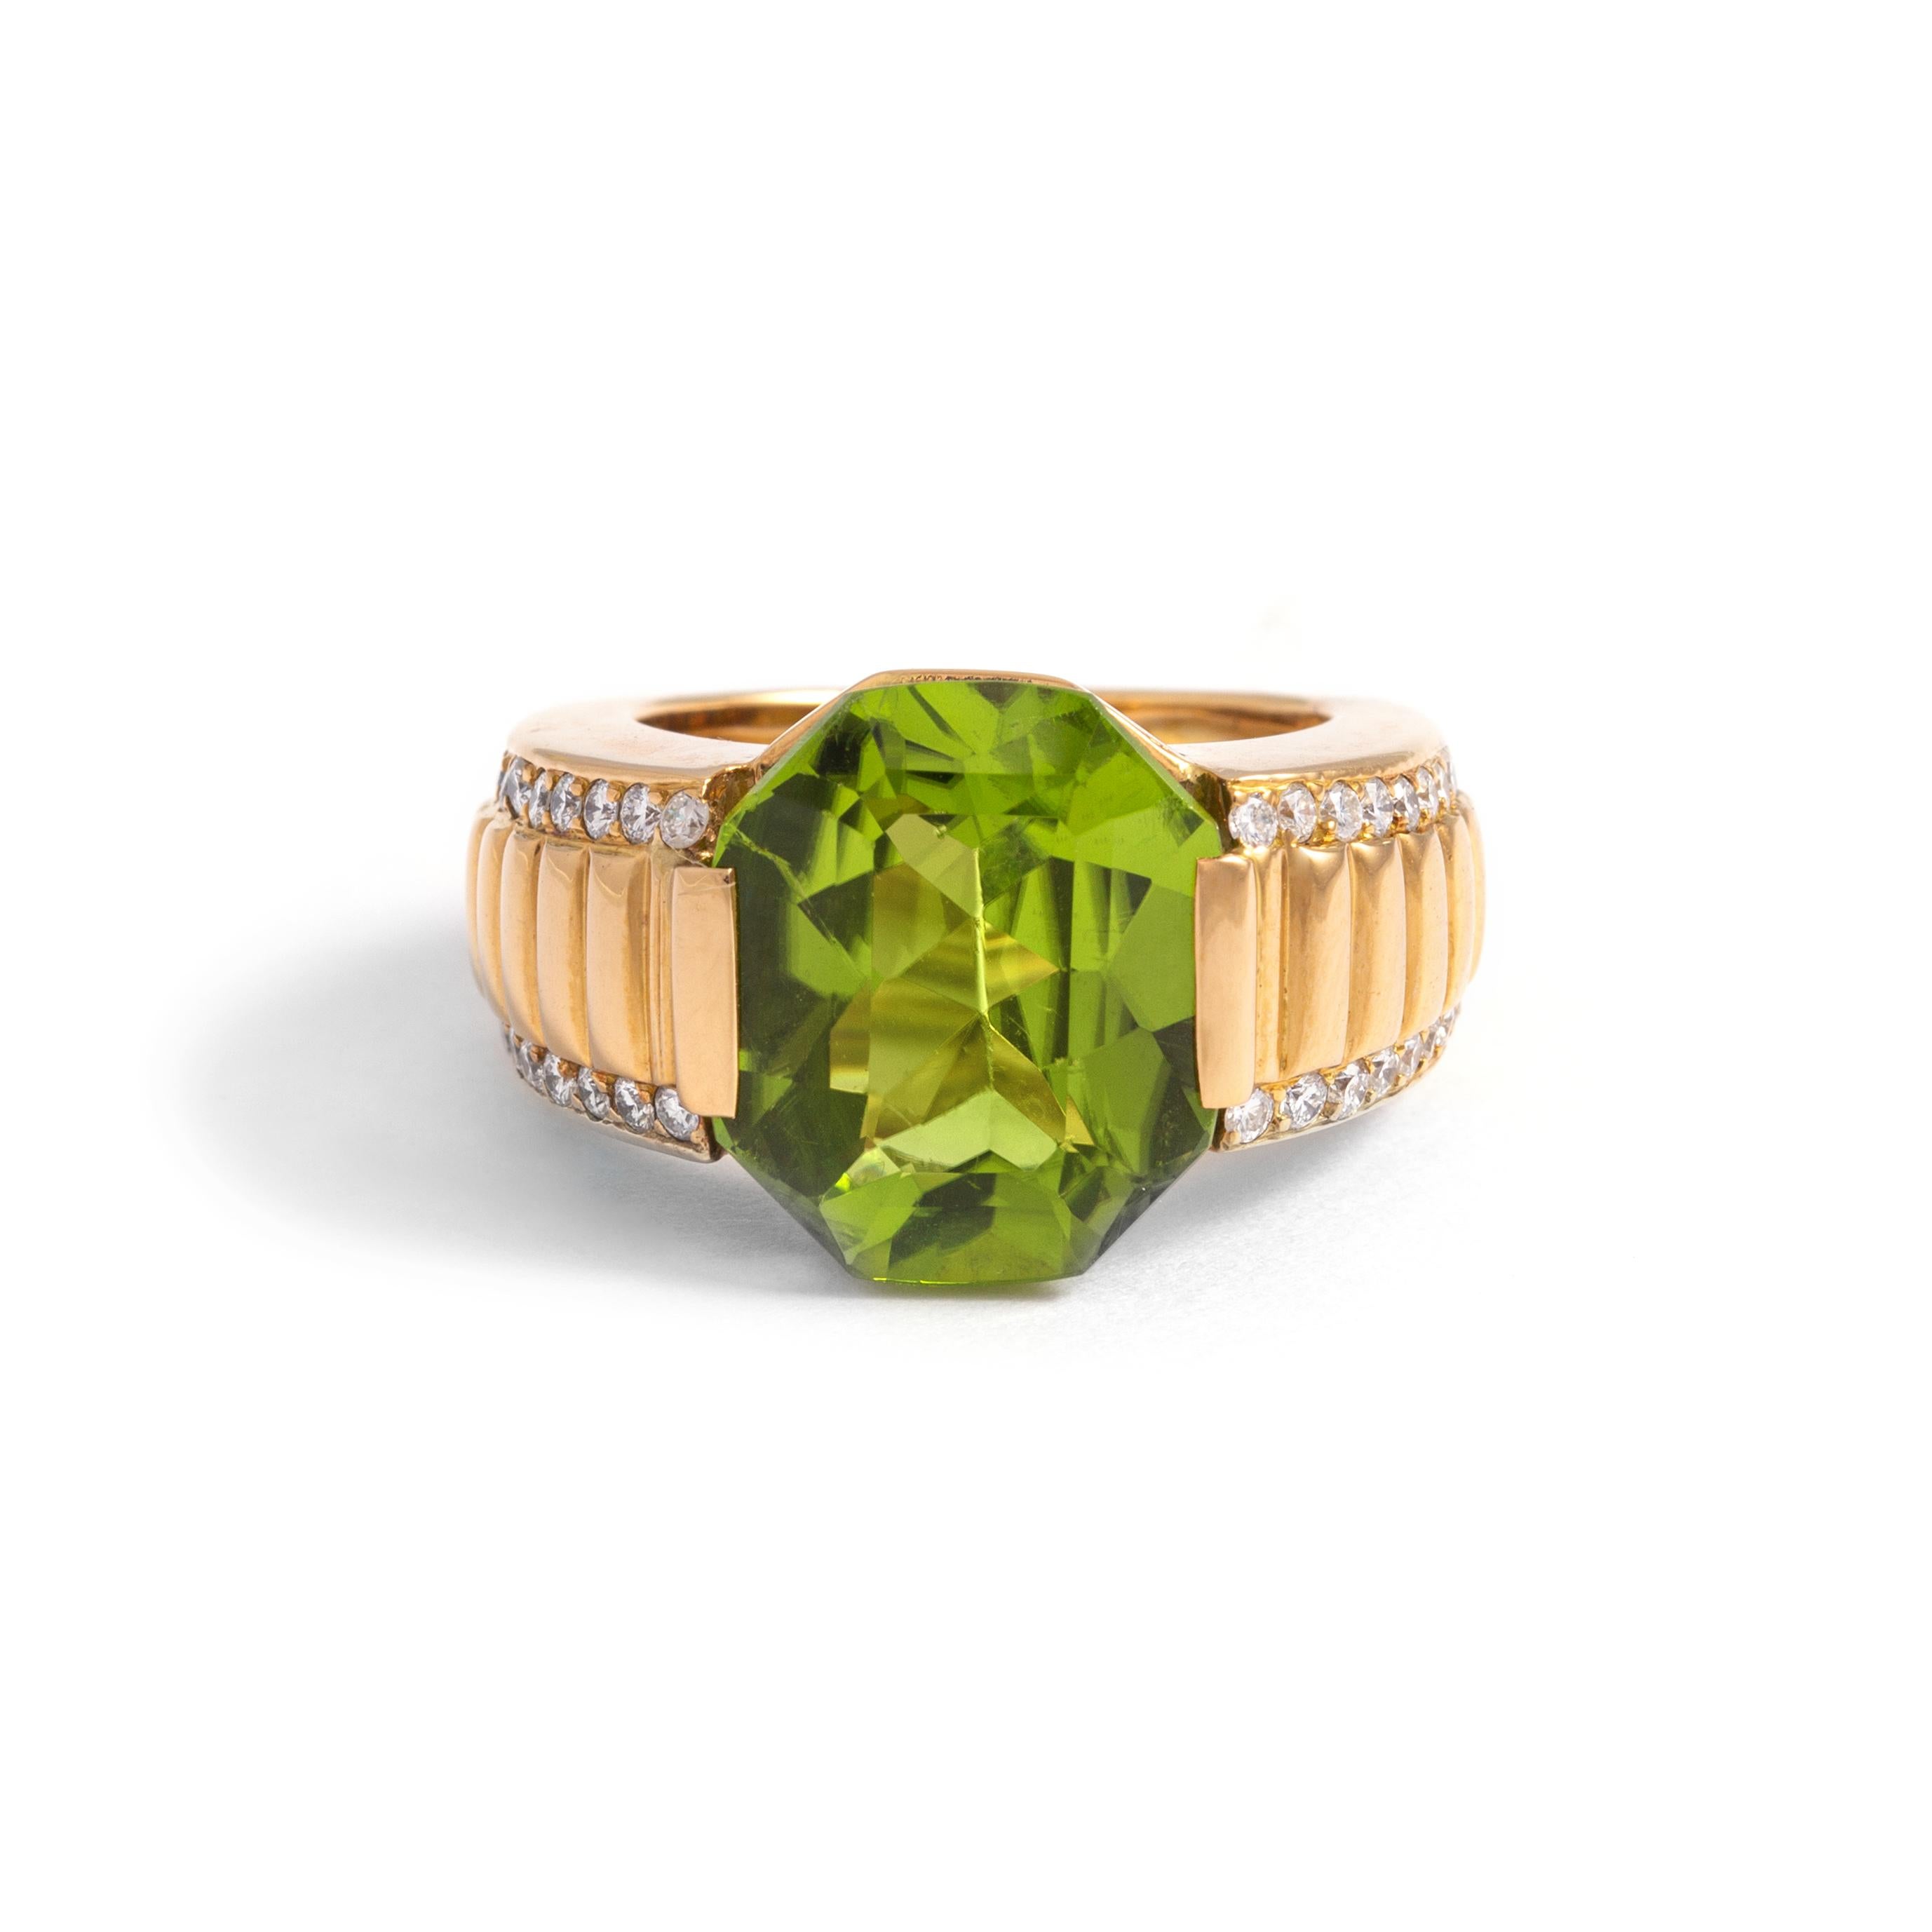 7.50 carat Peridot shouldered by Diamonds on Gold Ring.